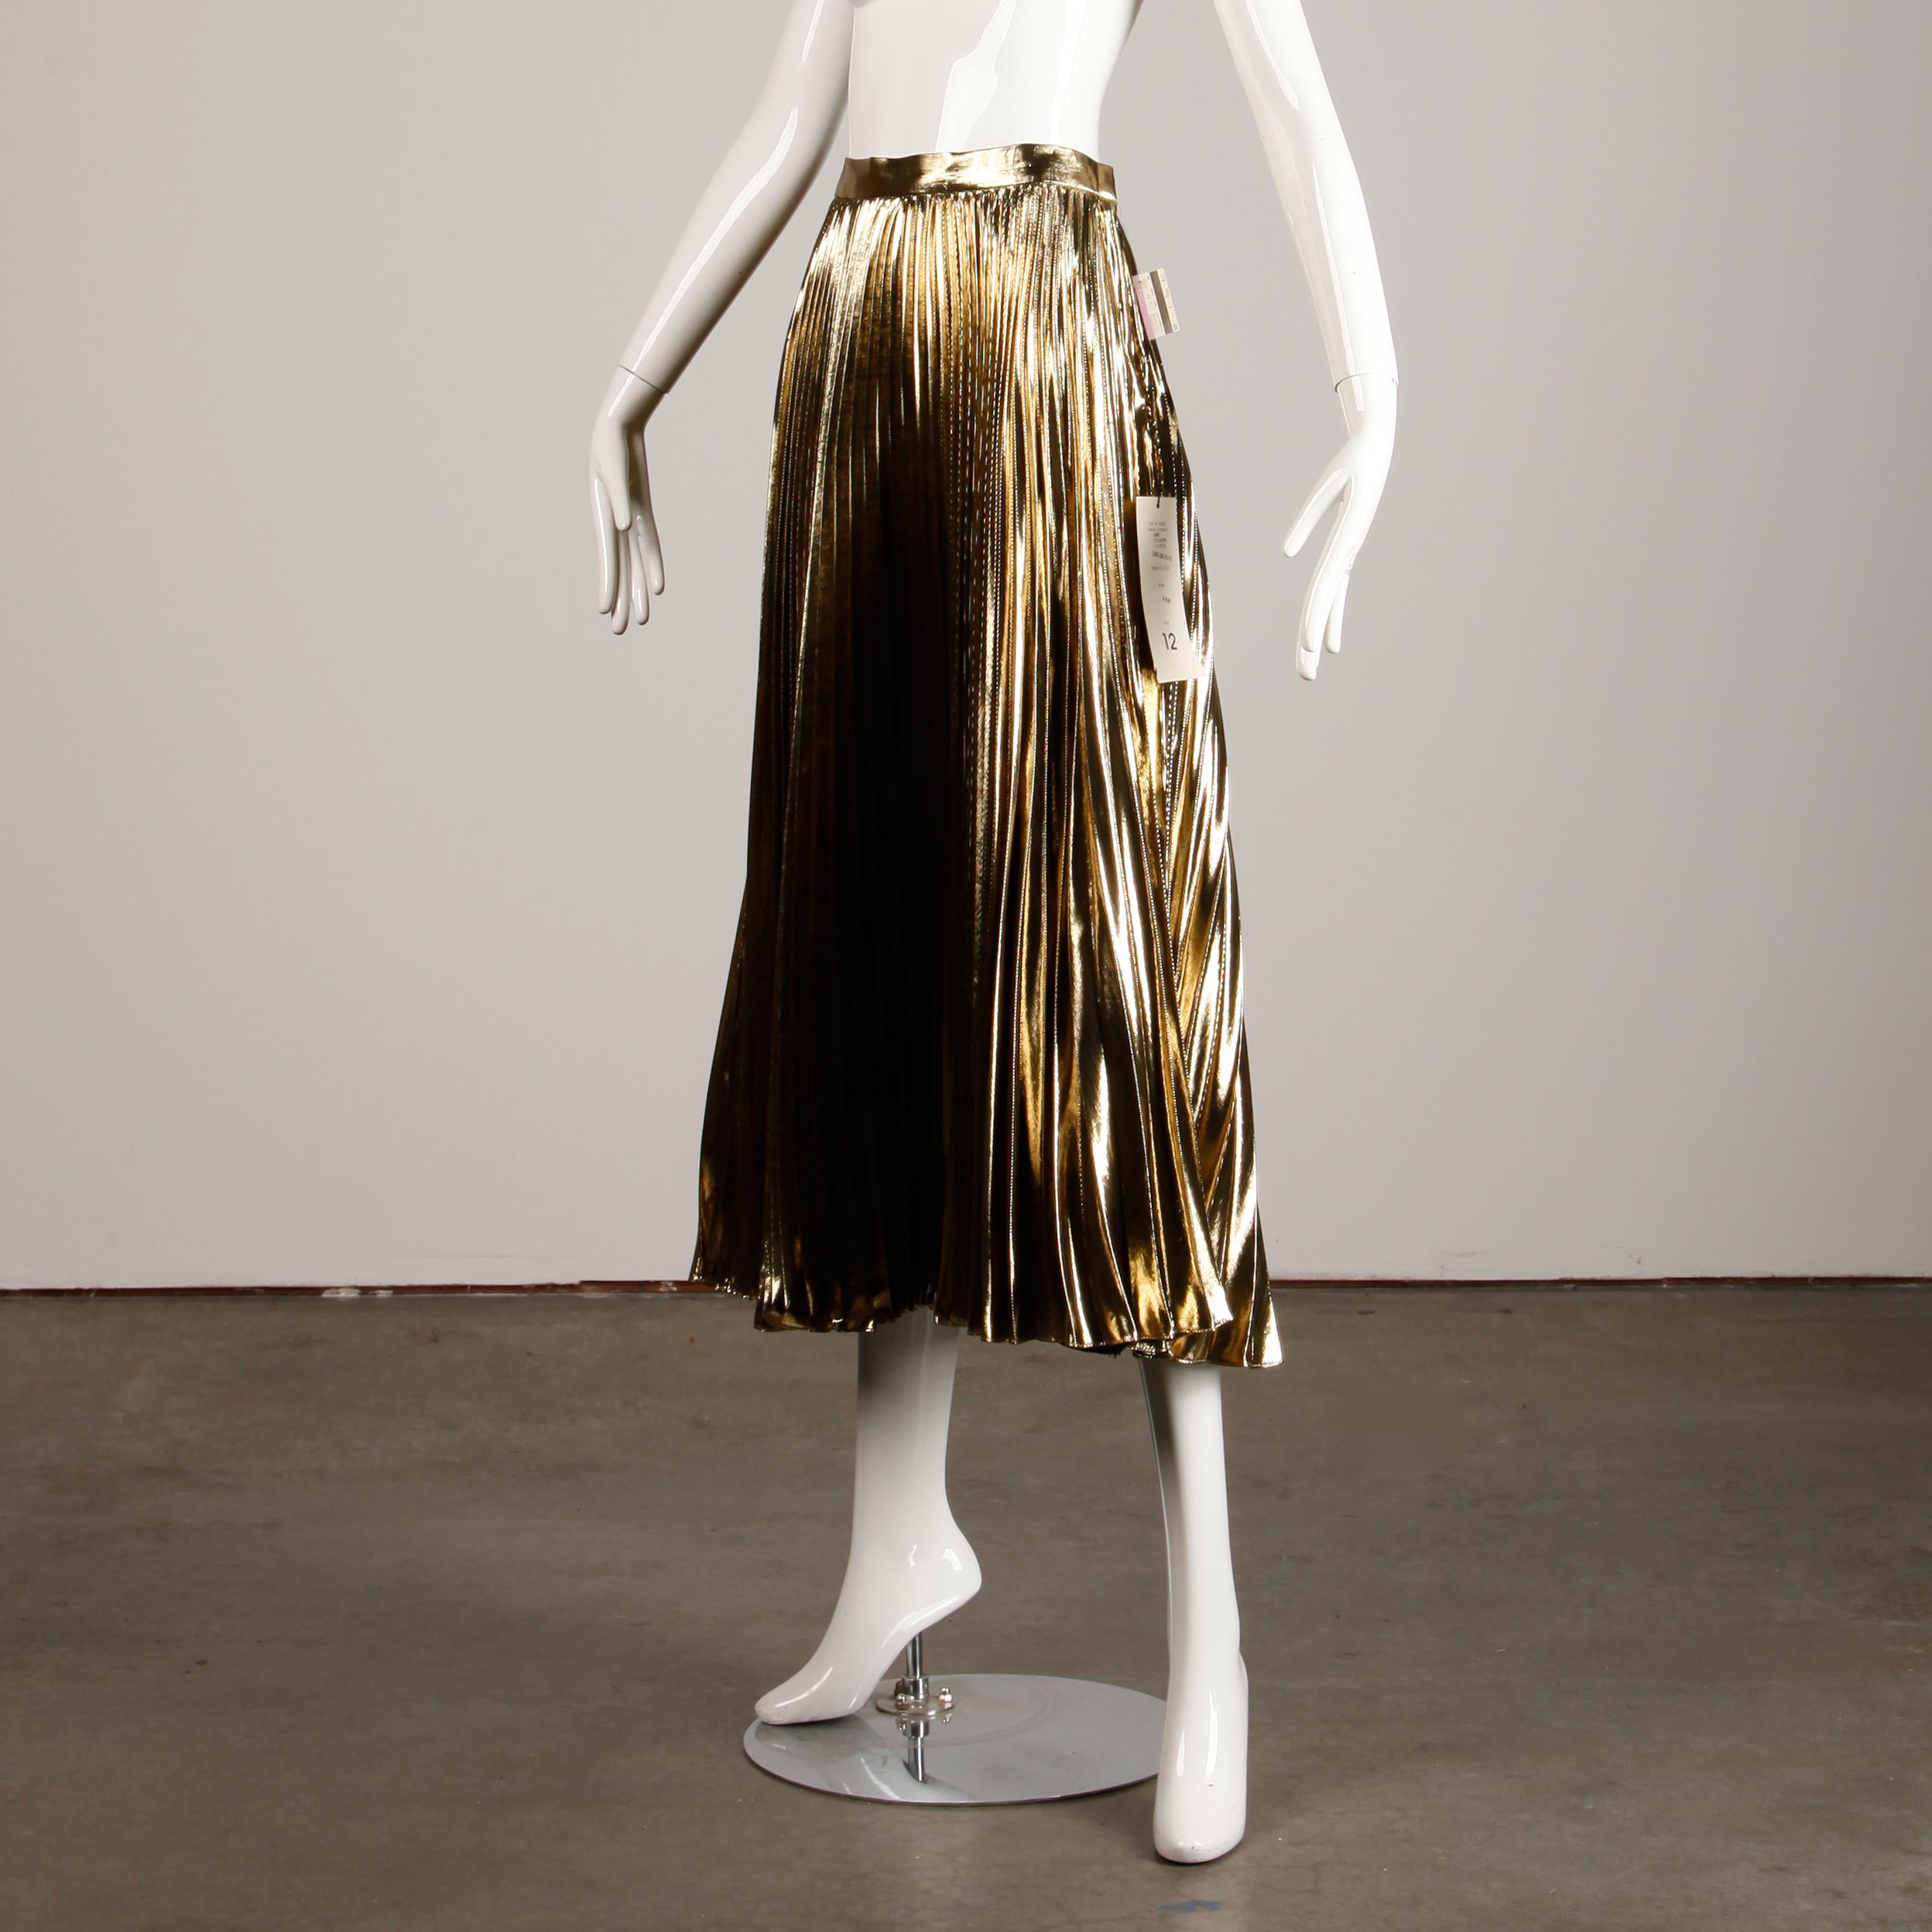 Women's Unworn with Tags 1980s Vintage Metallic Gold Lame Pleated Midi or Maxi Skirt